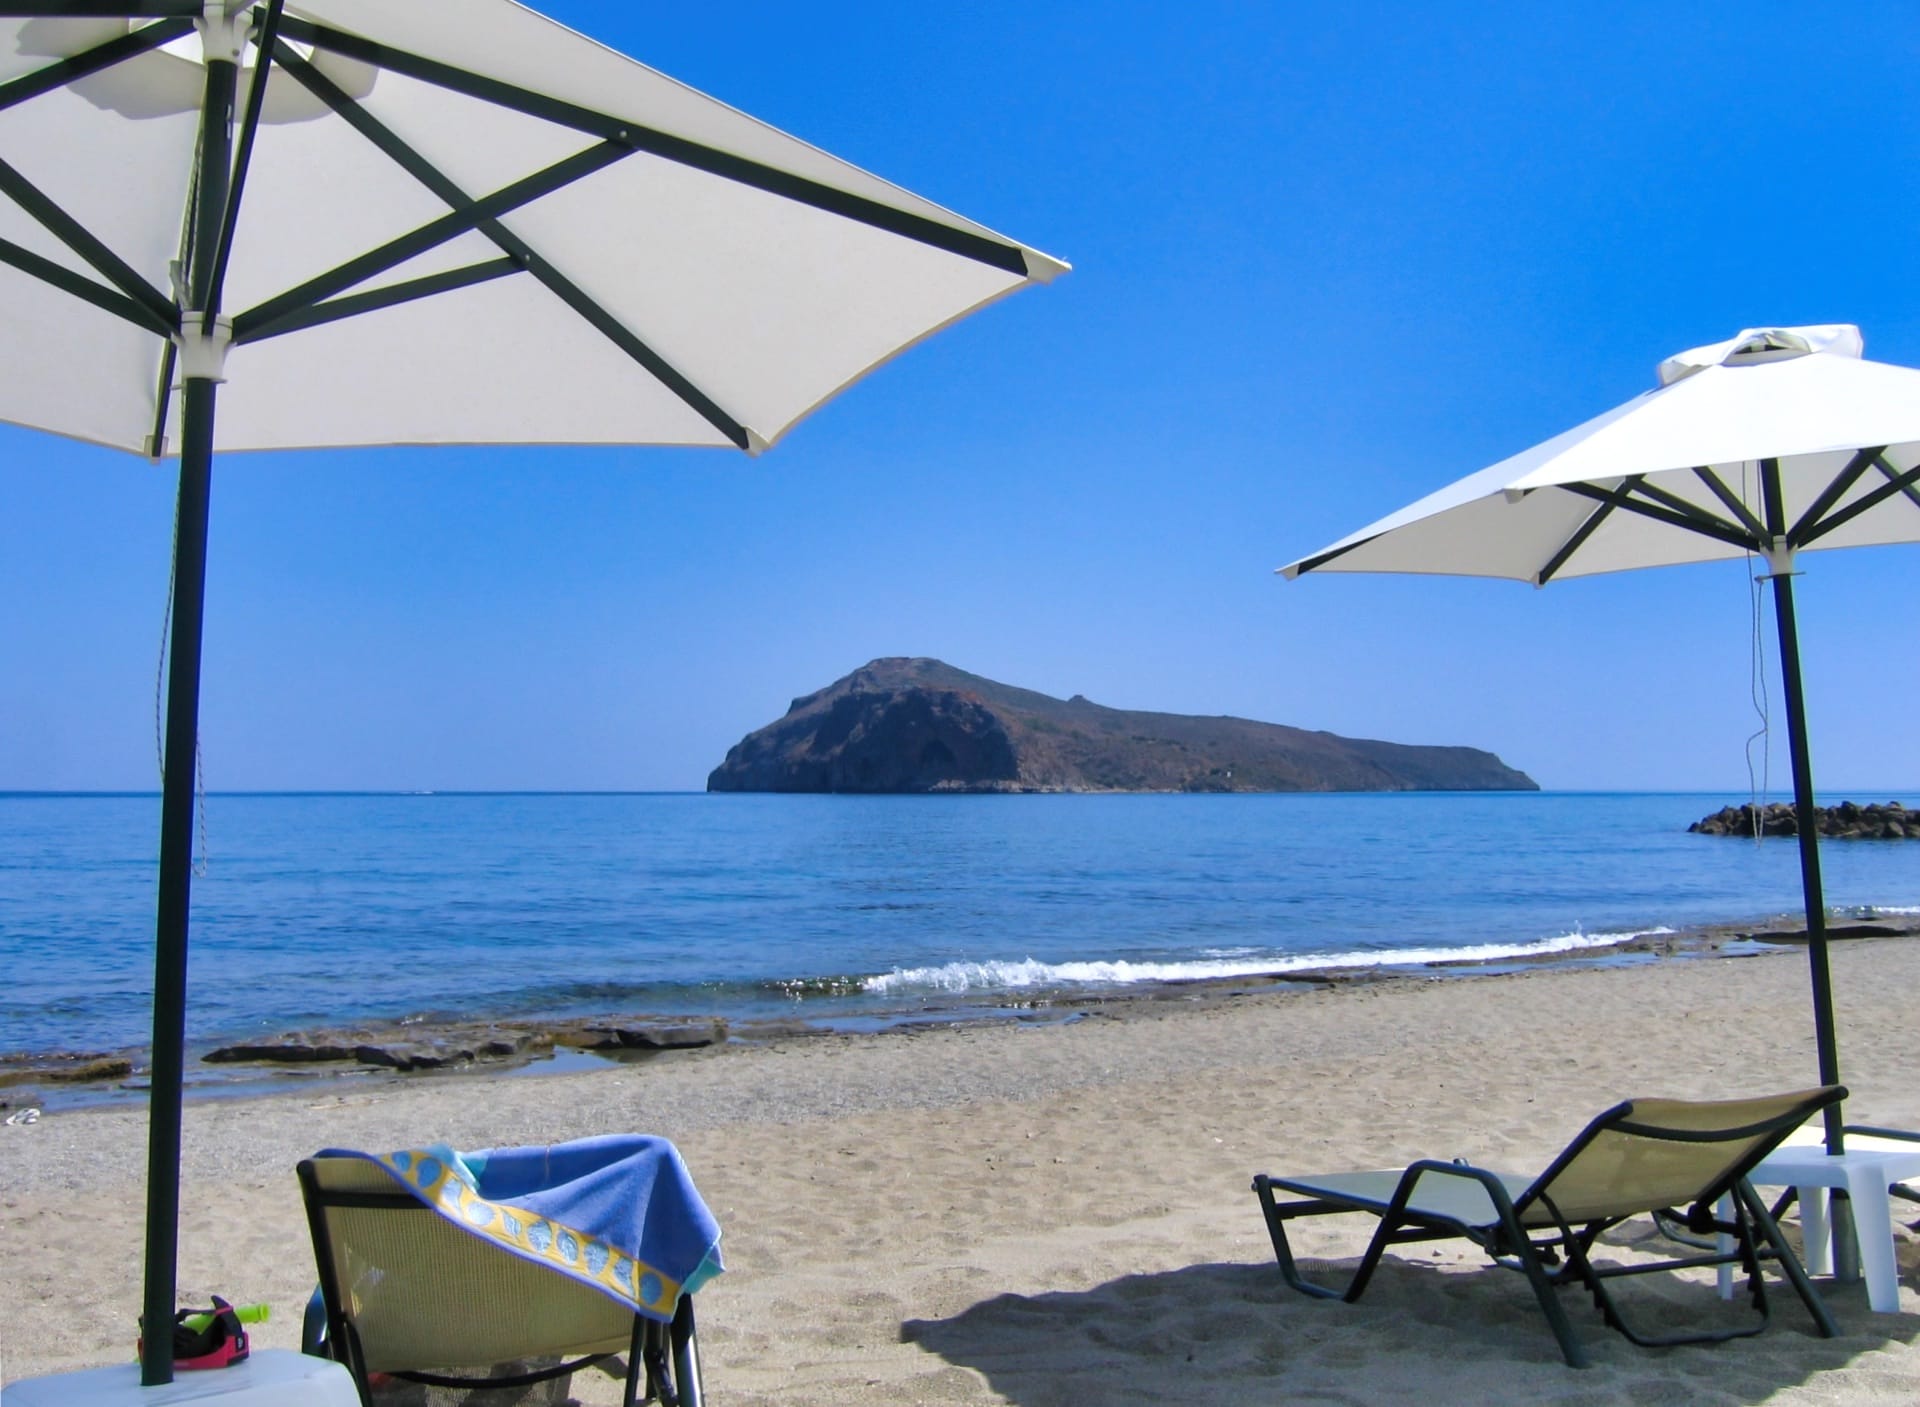 The Greek island of Crete is as popular with tourists today as it once was with foreign occupiers.